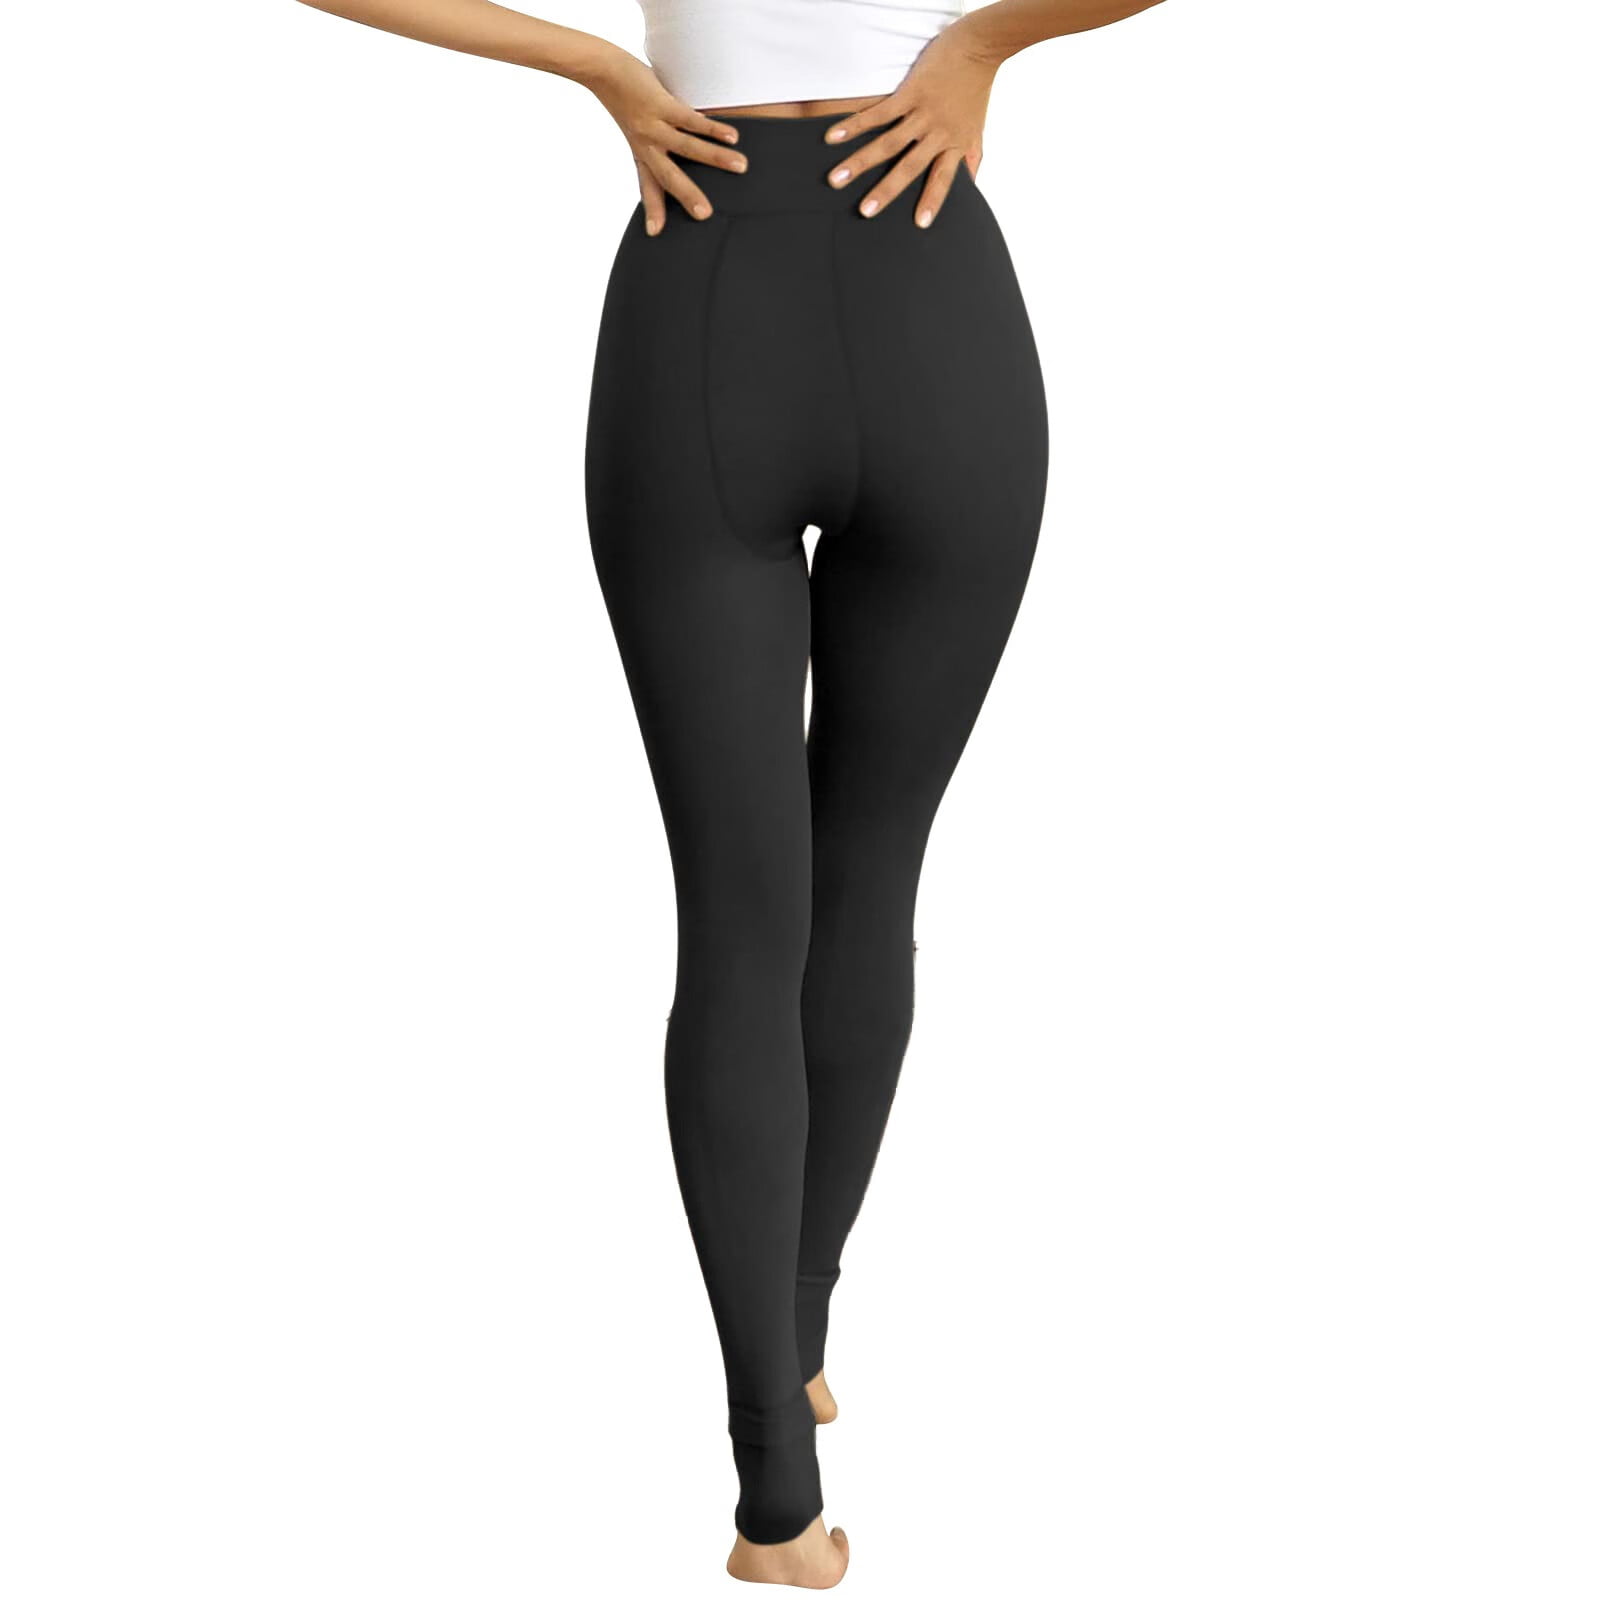 Women Clothing Women Flesh Nylon Pants Warm Leggings Plus Stockings Size 500G Stepping Spandex Toned Tights Outer Black-2-L Wear Bare for Legging Women Thicken And Seamless Velets